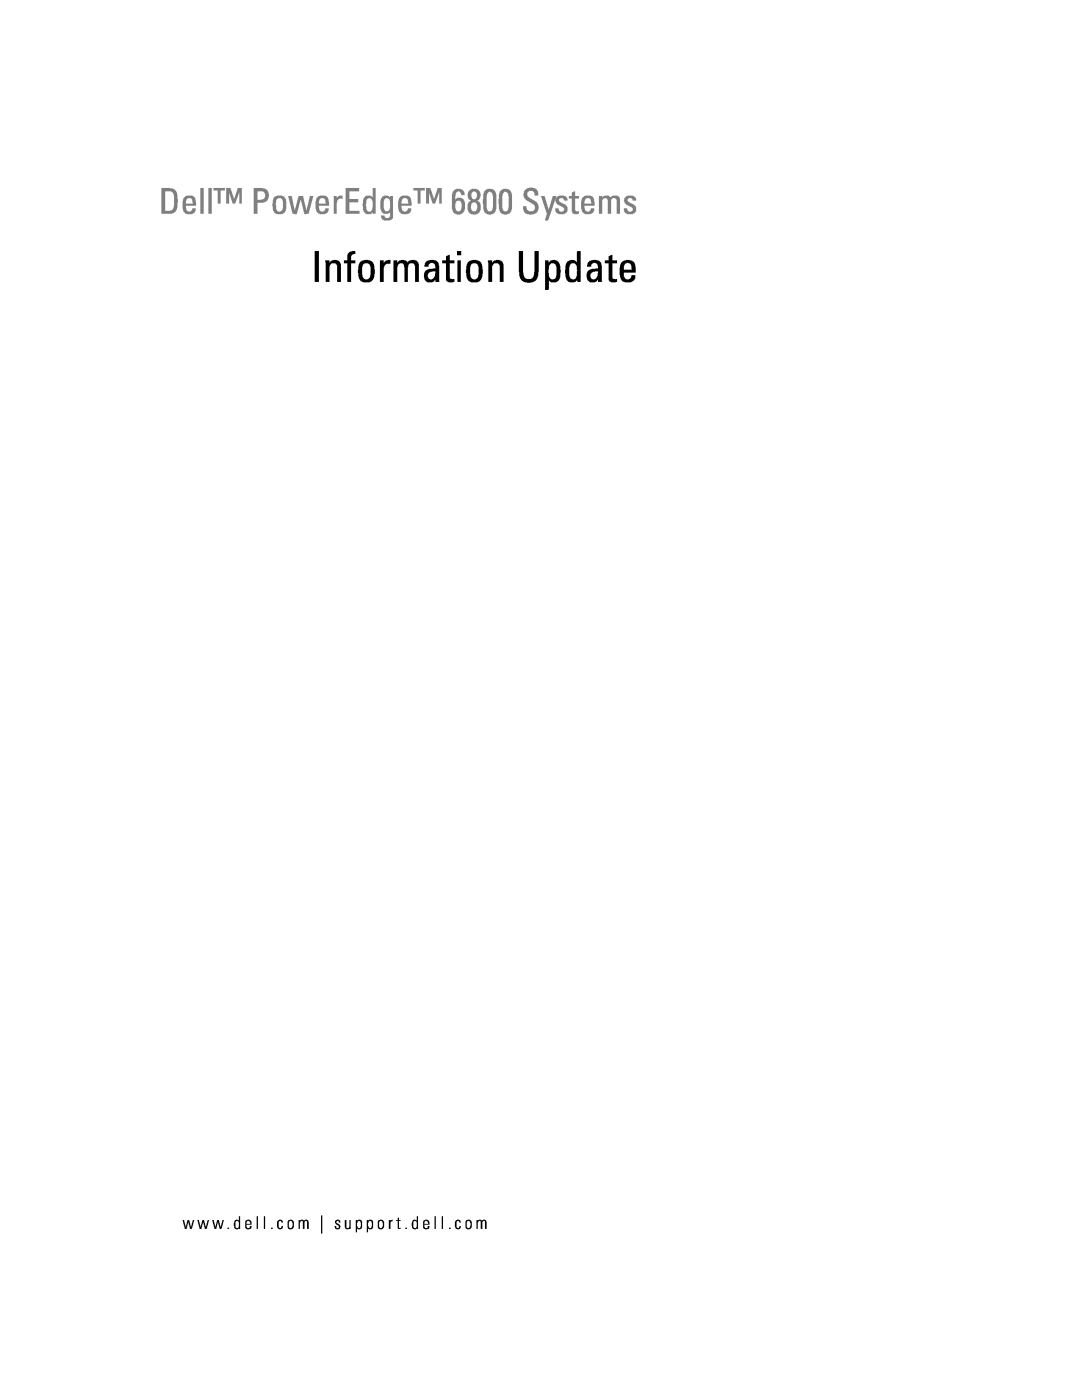 Dell manual Information Update, Dell PowerEdge 6800 Systems 